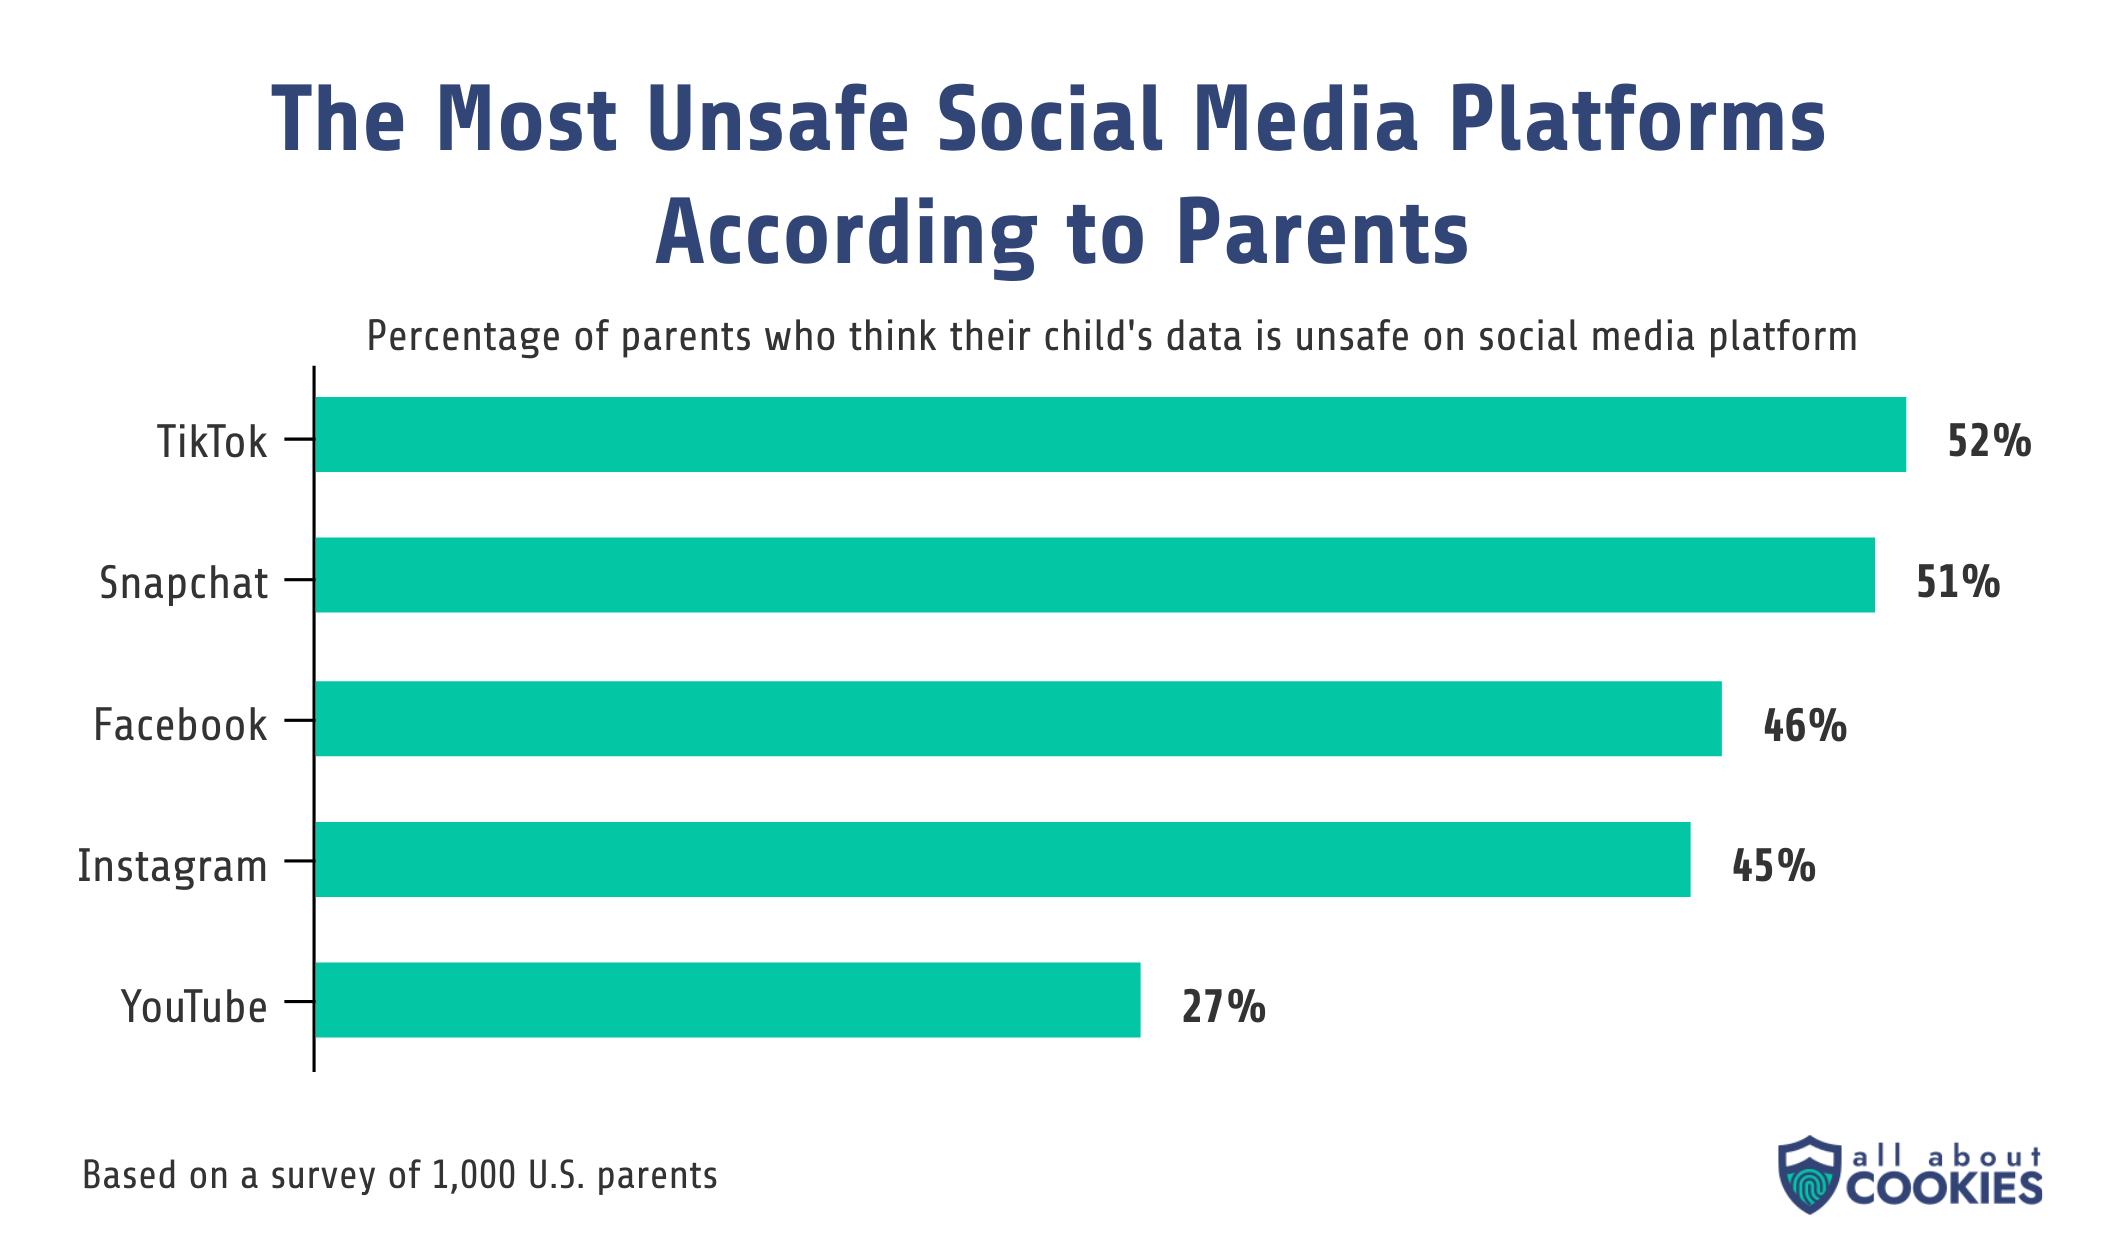 A bar chart showing the most unsafe social media platforms according to parents. TikTok ranks at number one with 52% of parents thinking it's unsafe, while Snapchat, Facebook, and Instagram rank second, third, and fourth.